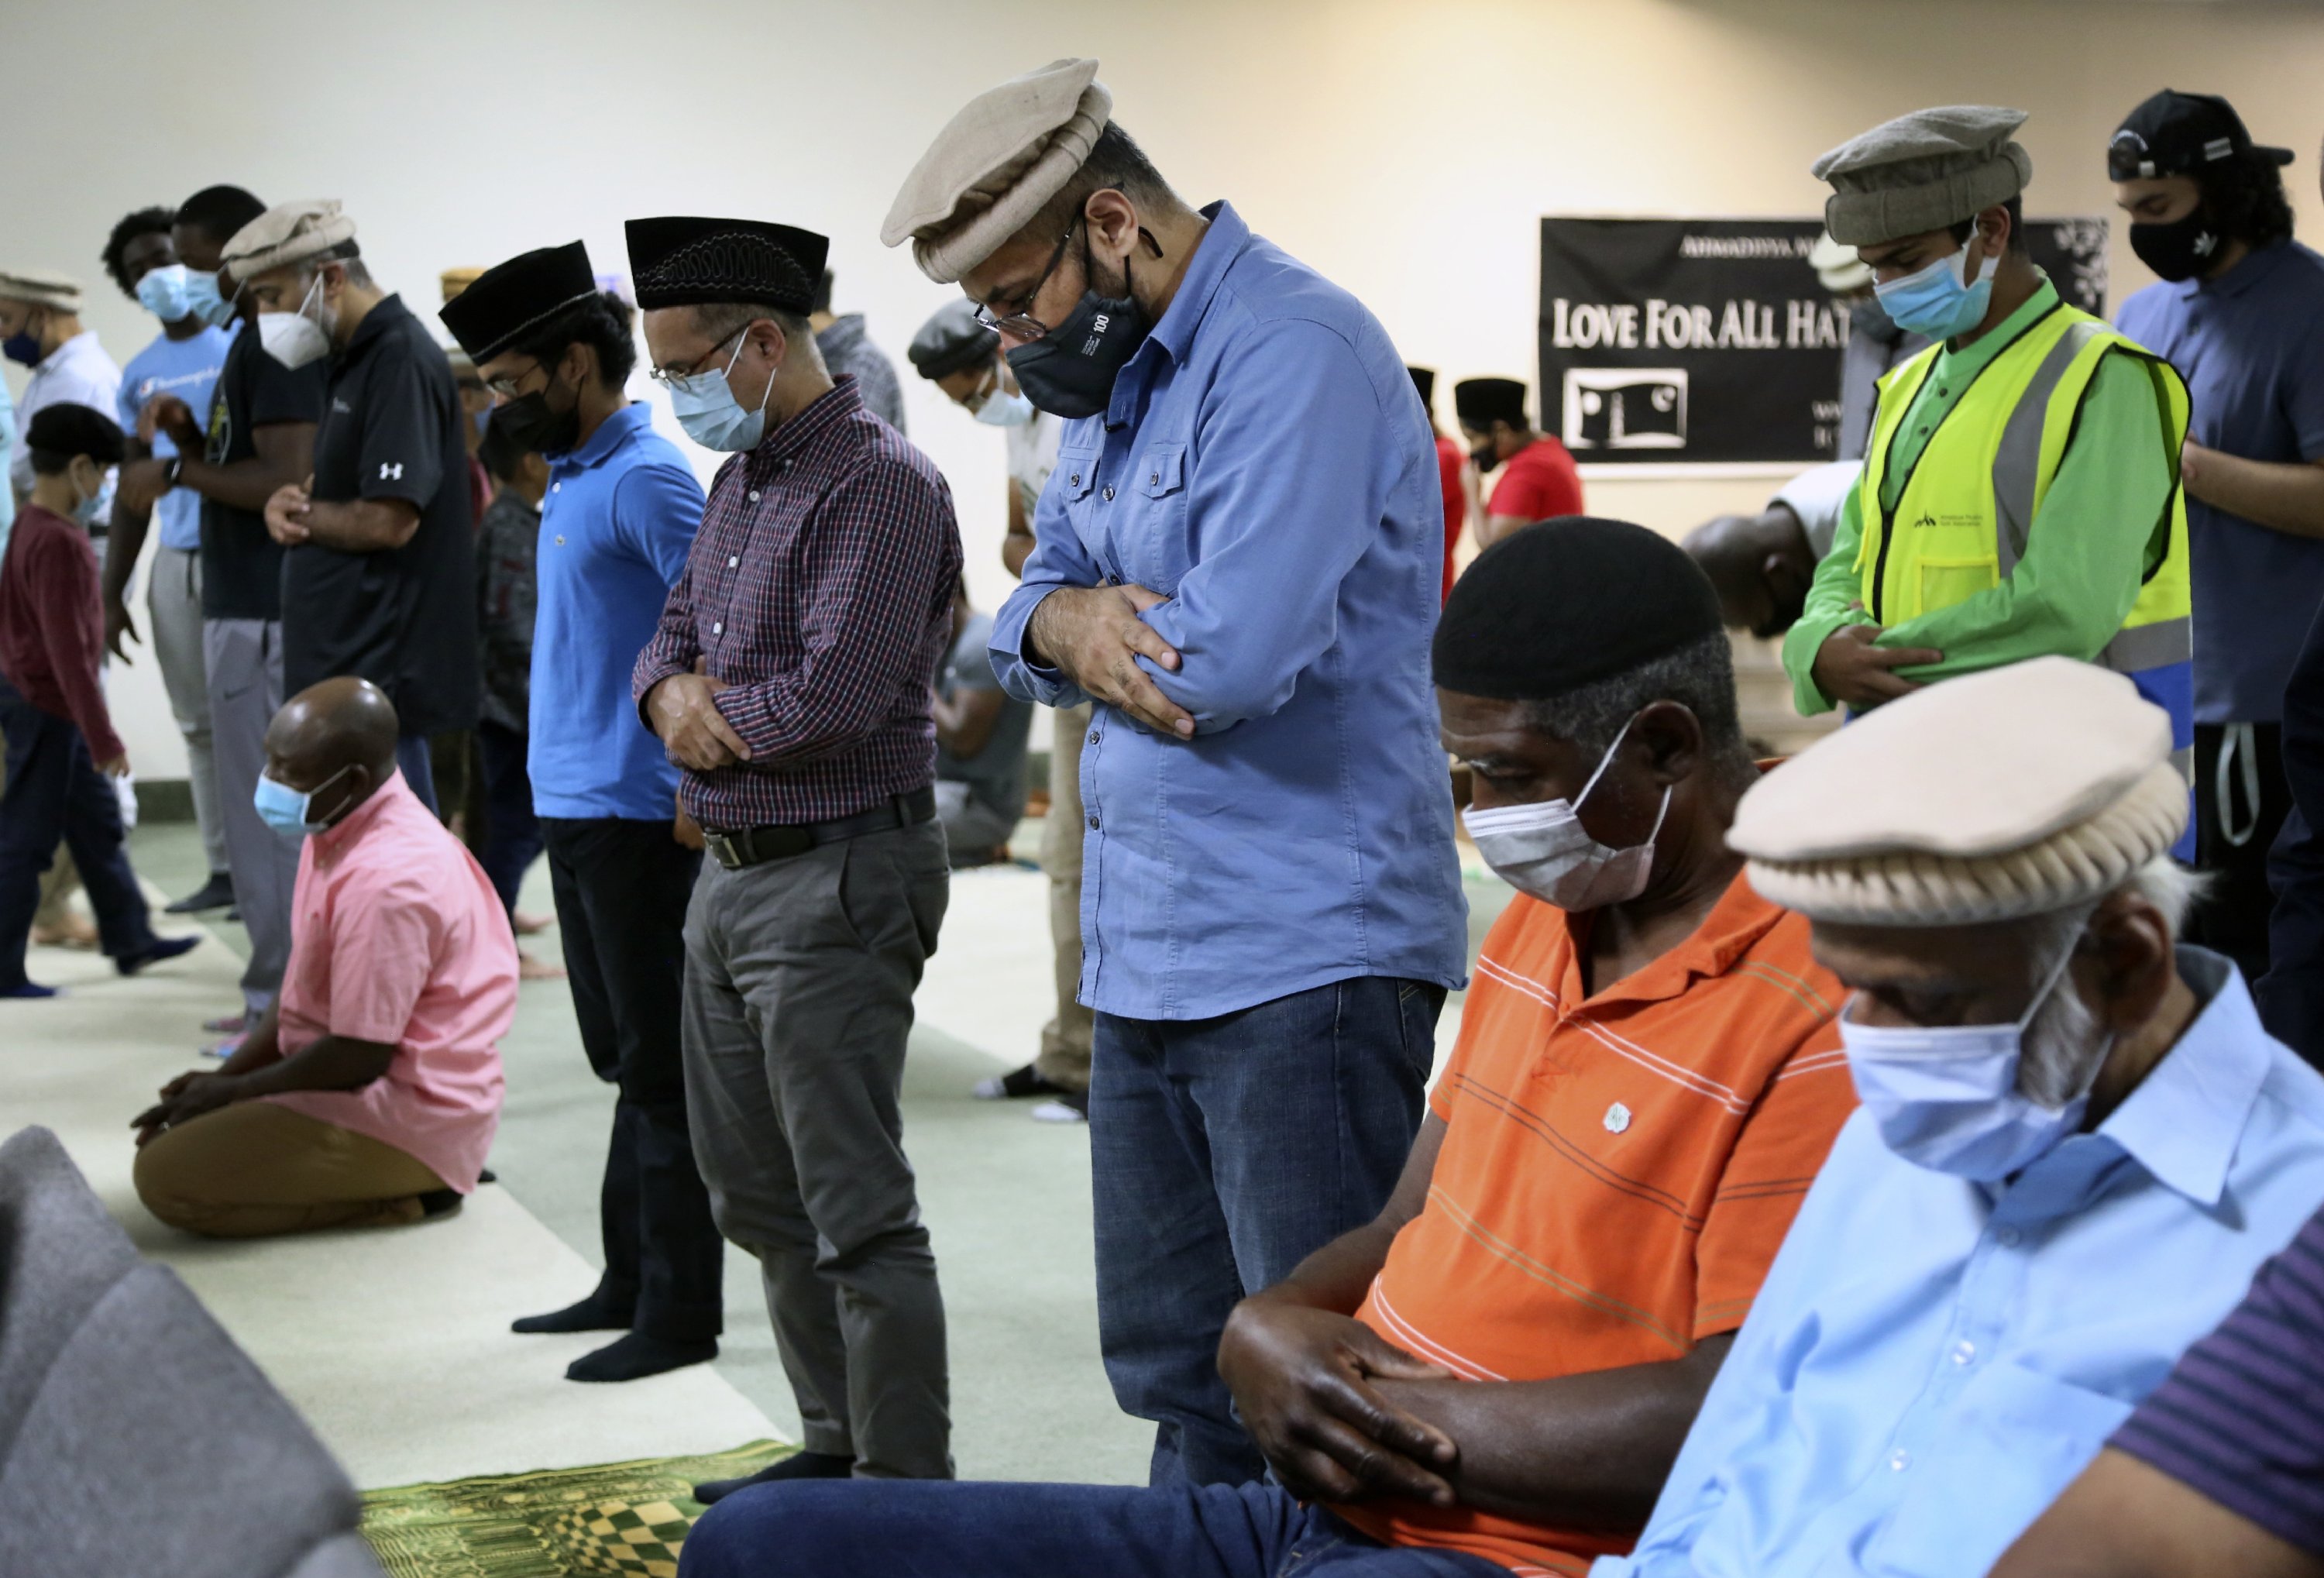 Mansoor Shams (C) and other community members attend Friday prayer in Rosedale, Maryland, U.S., Aug. 13, 2021. (AP Photo)